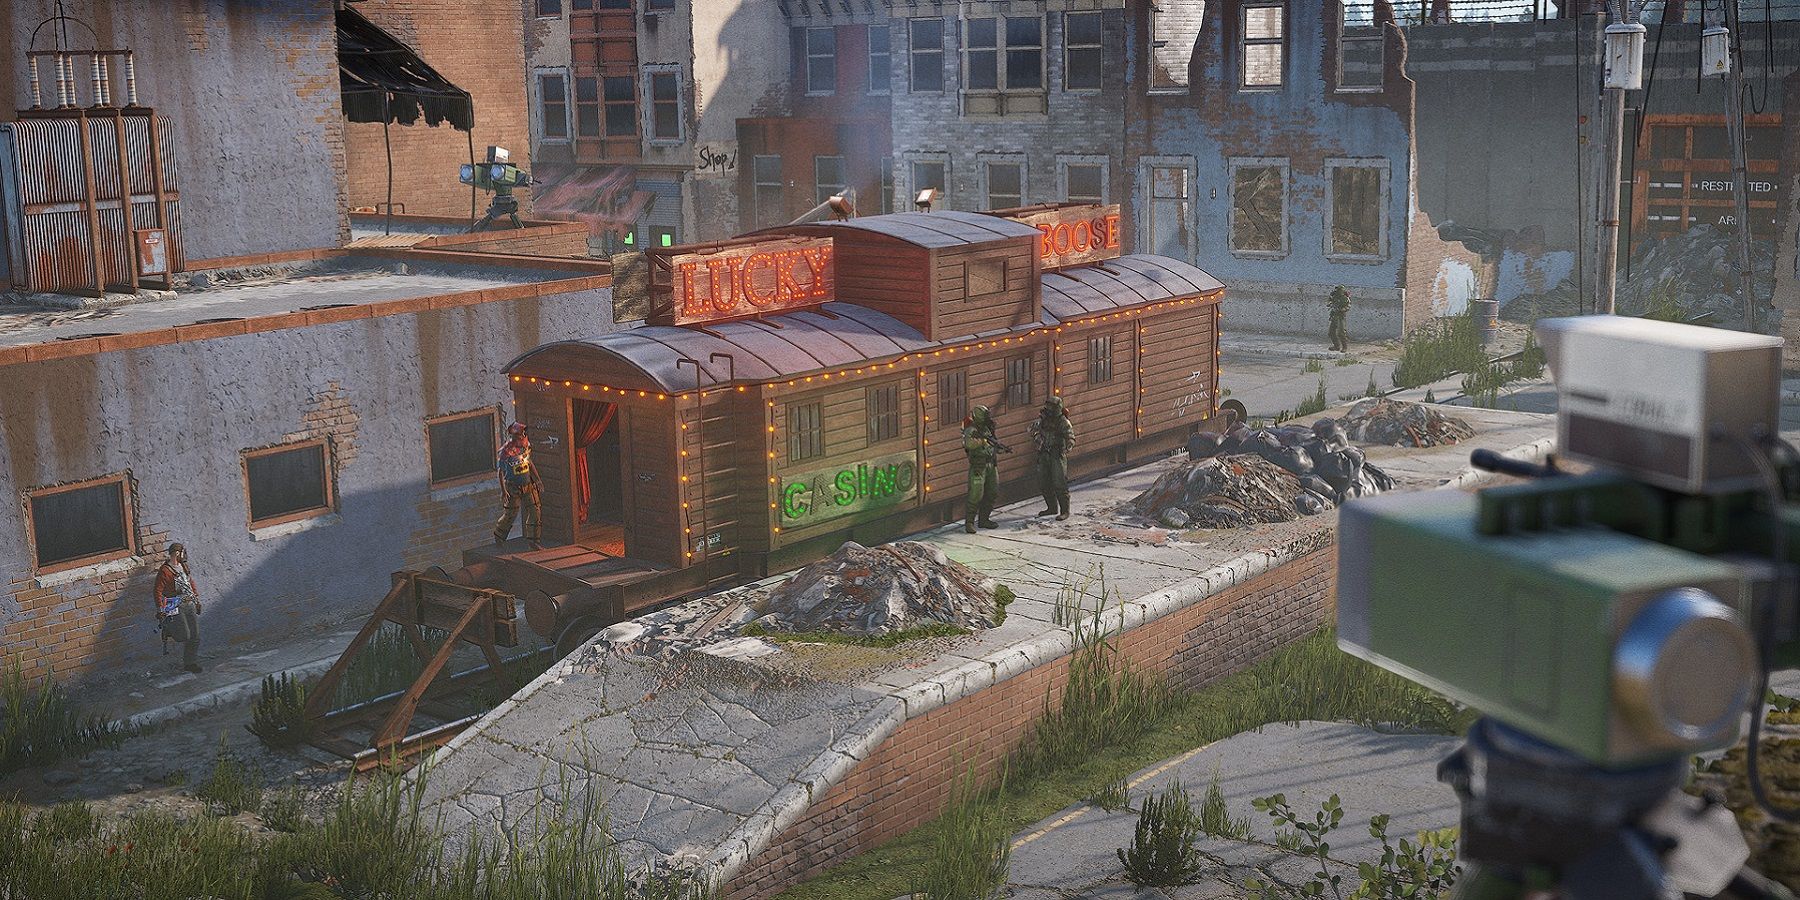 Image from Rust showing a train caboose at an outpost.